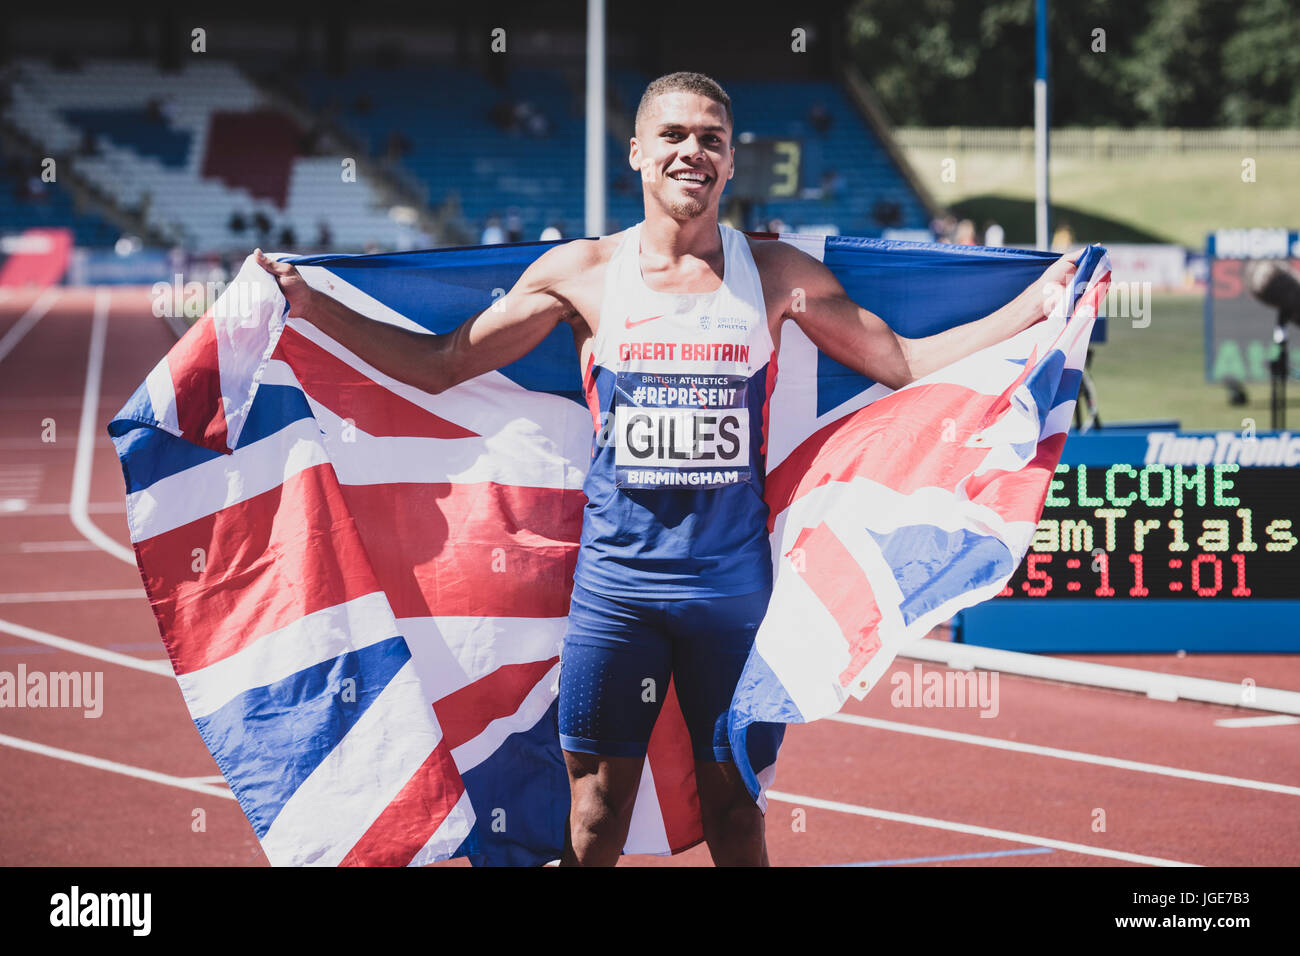 Elliot Giles after his victory in the 800m at the British Athletics Championships and World Trials at Birmingham, United Kingdom on 1-2 July 2017 Stock Photo